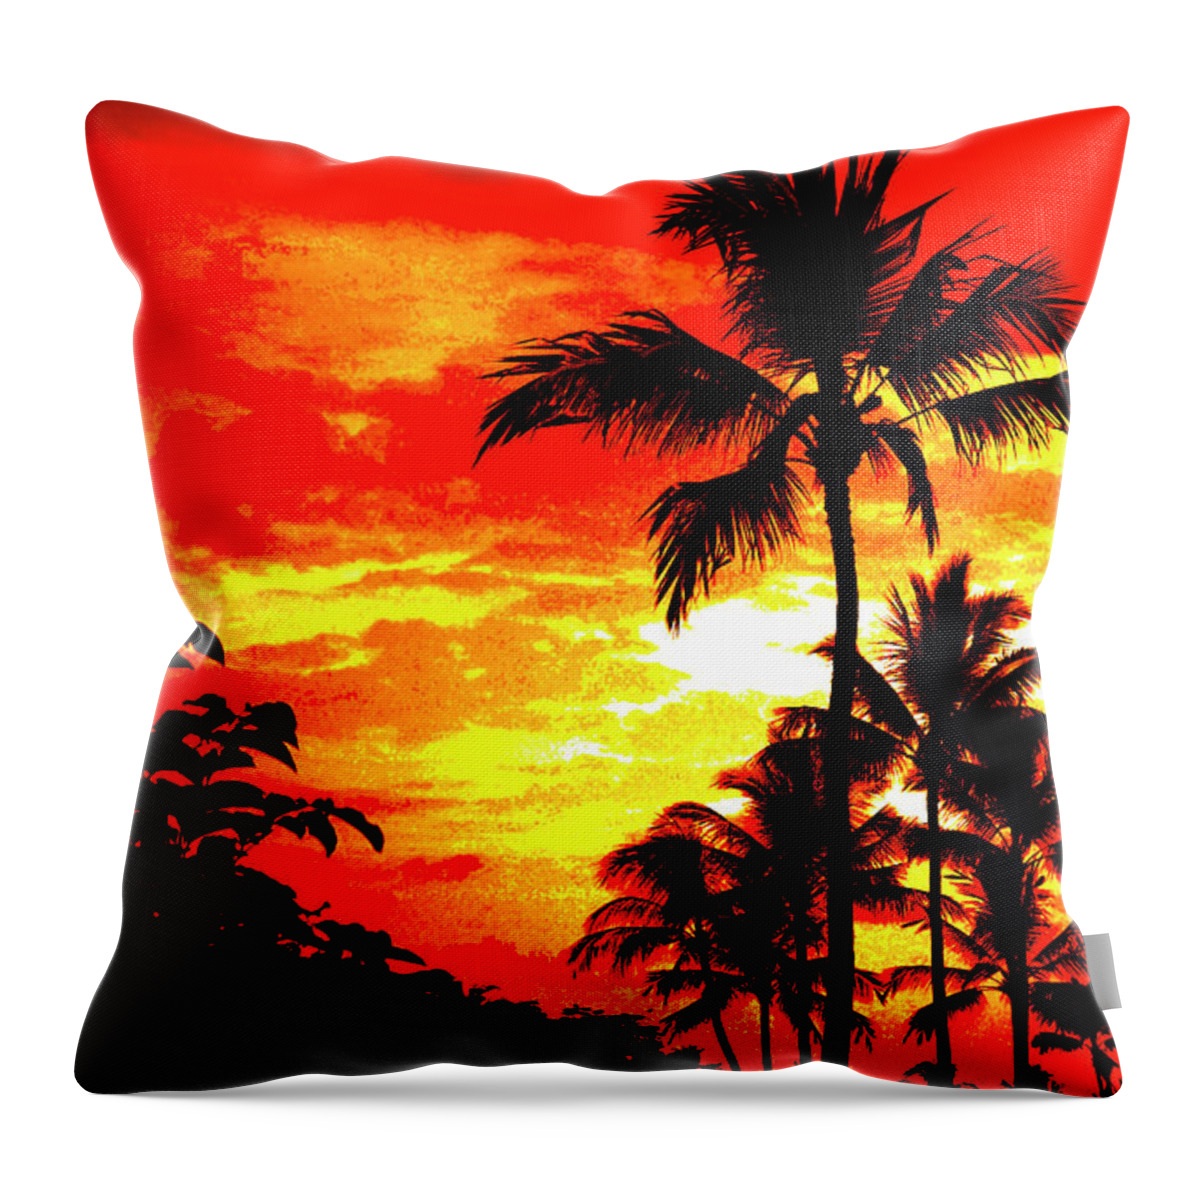 David Lawson Photography Throw Pillow featuring the photograph Red Sky At Night by David Lawson